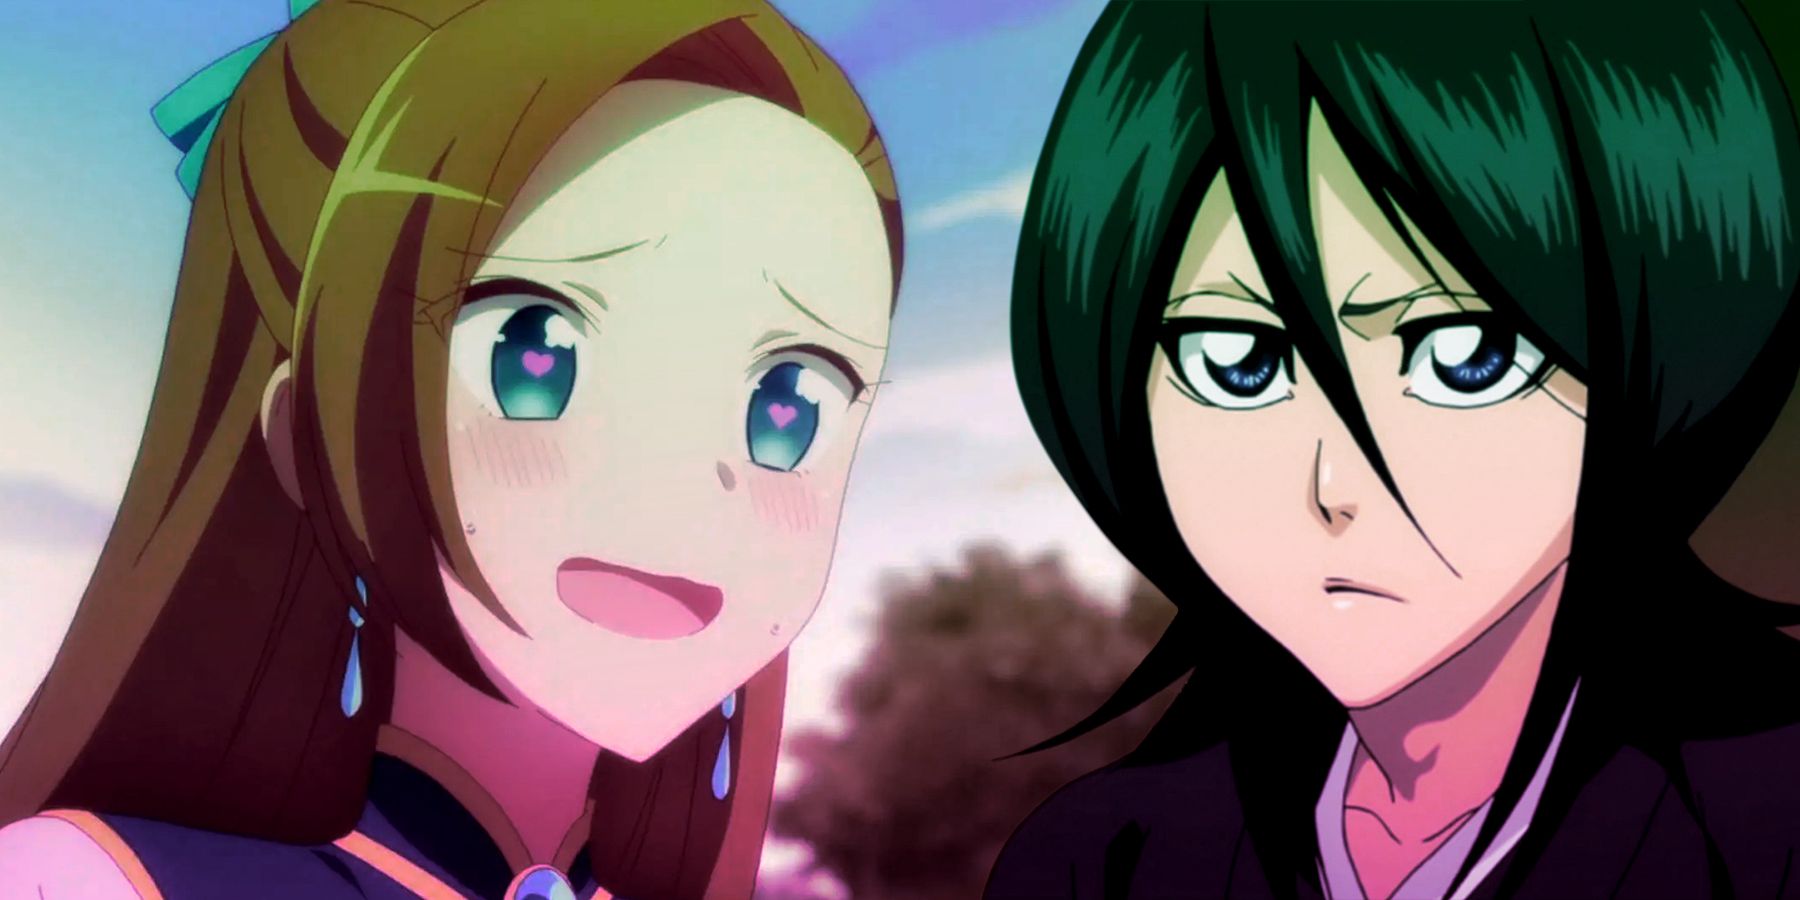 On the left, Katarina Claes of 'My Next Life as a Villainess' blushes and smiles with hearts in her eyes. On the right, Rukia Kuchiki of 'Bleach' frowns.